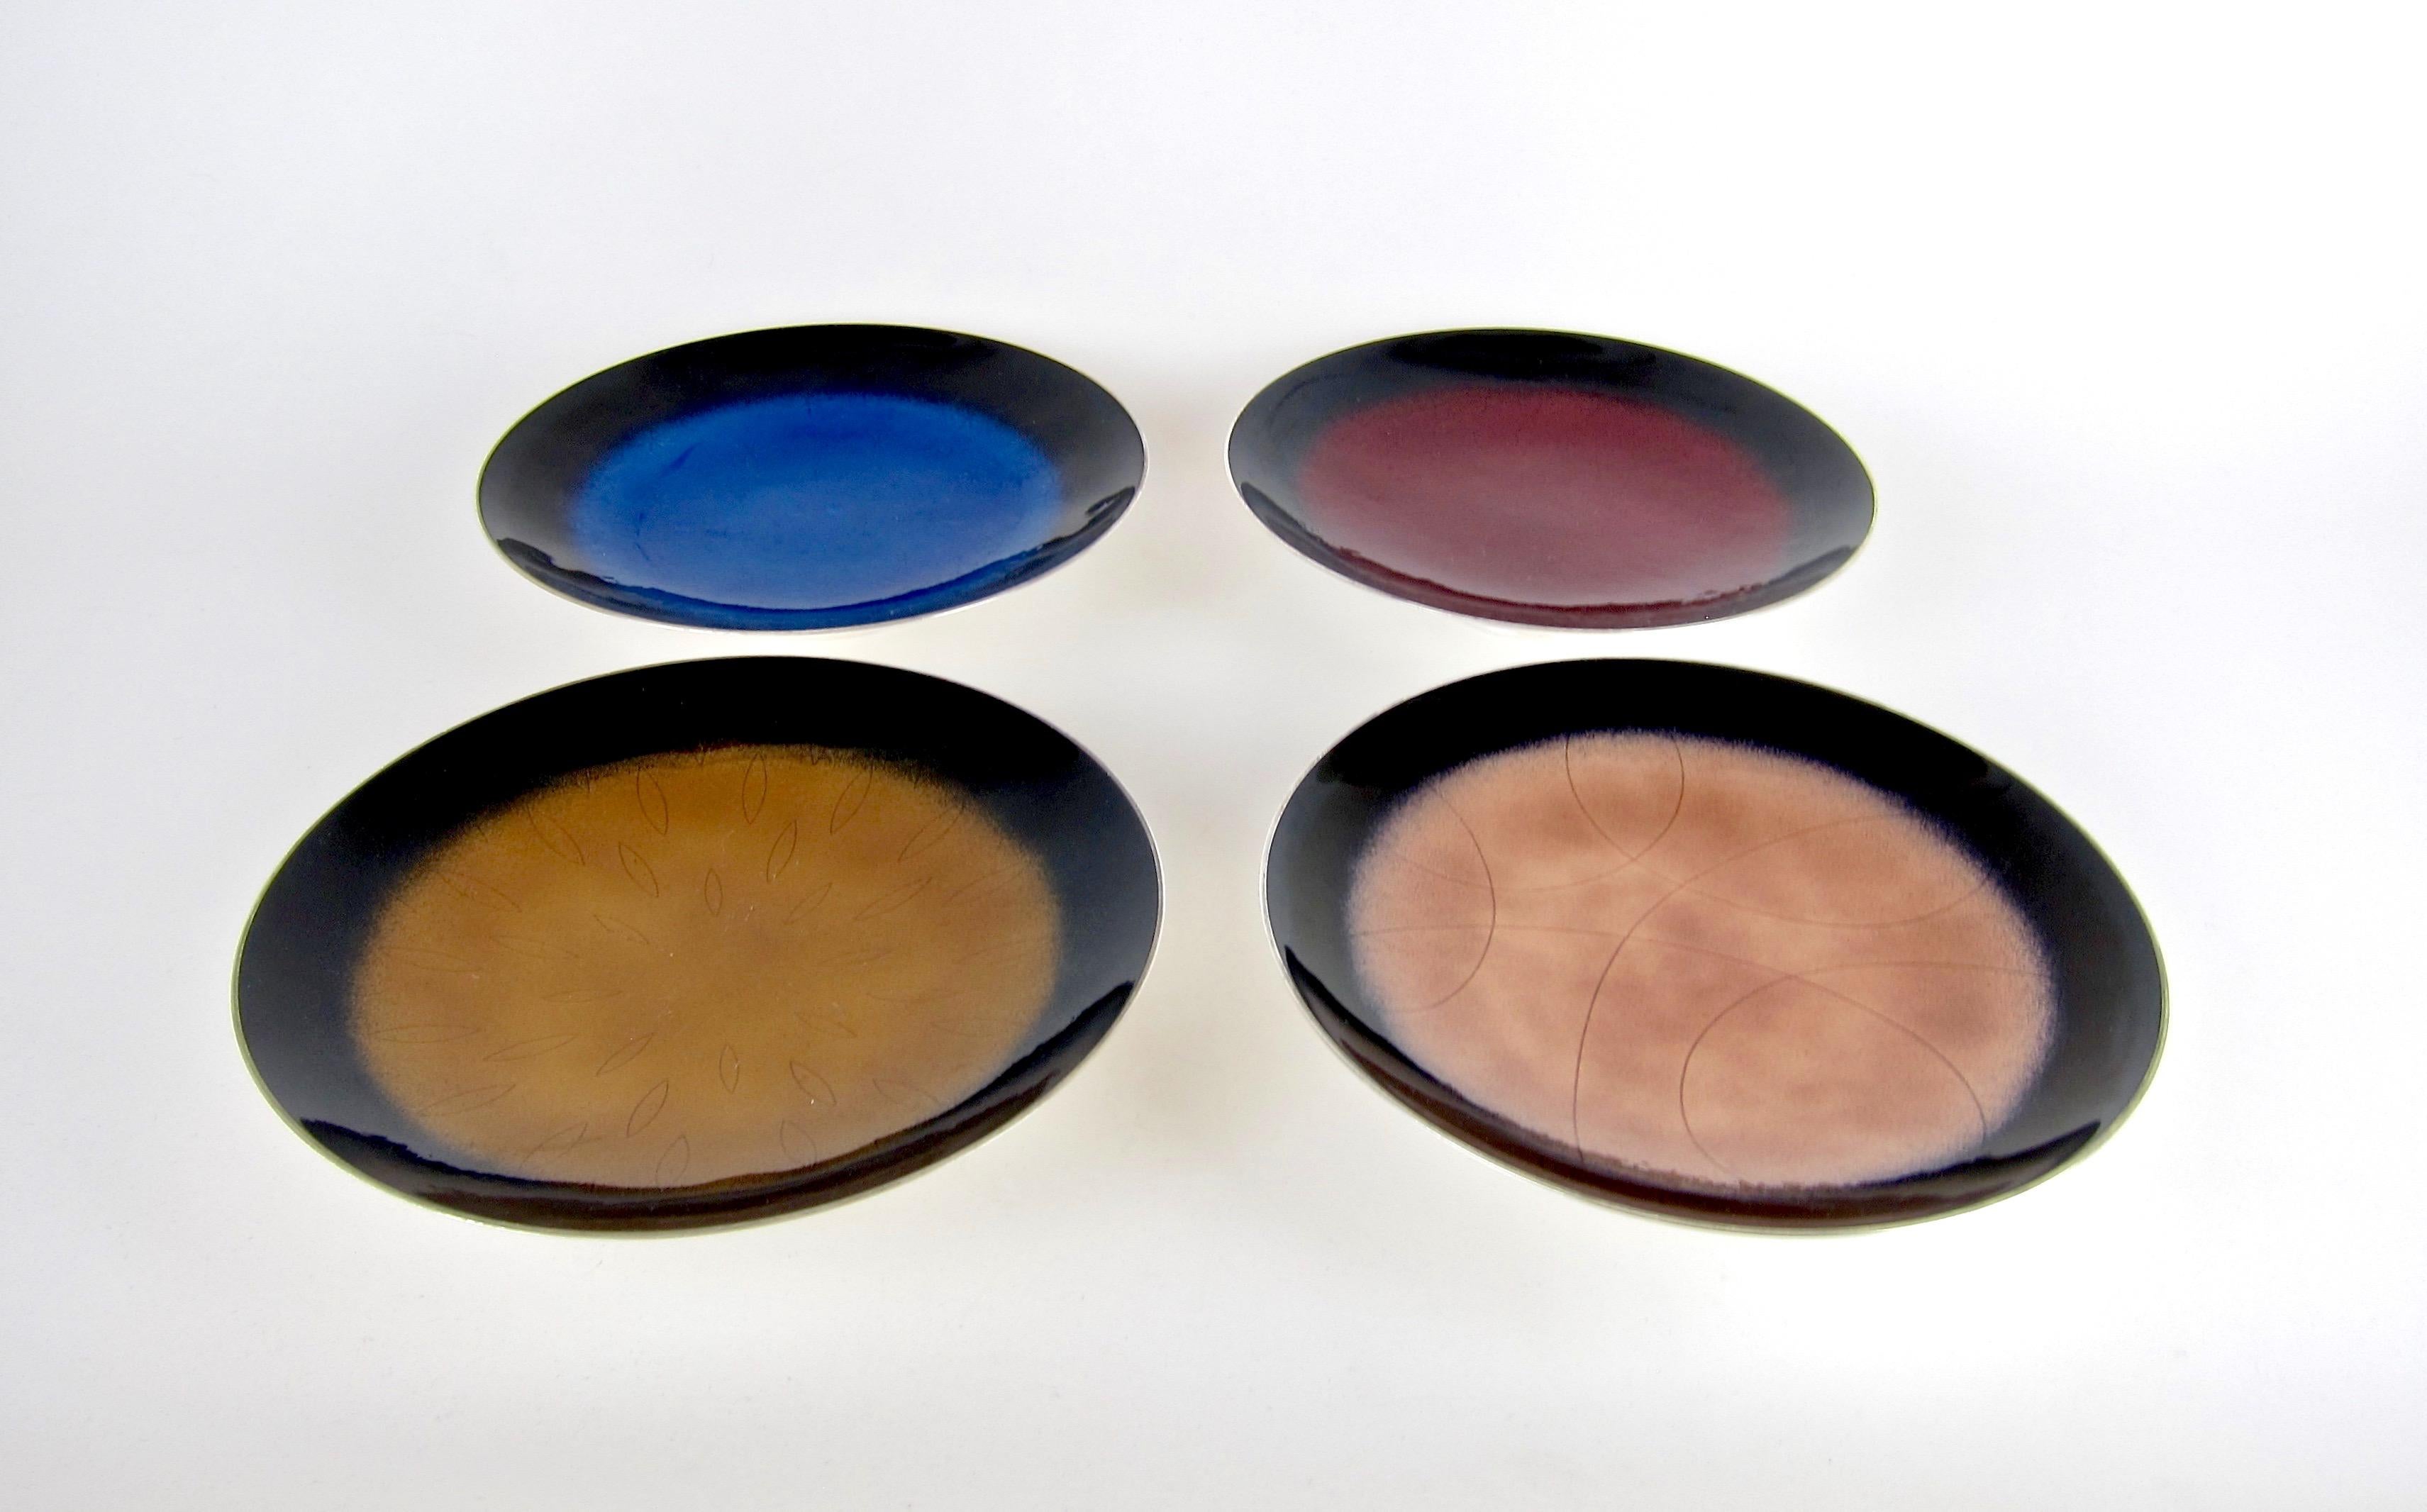 A complete set of four Mid-Century Modern enameled tazzas (a shallow dish with a short foot) in silver plate from Towle silversmiths of Newburyport, Massachusetts, designed circa 1955. The pieces are illustrated as a set in Jewel Stern's